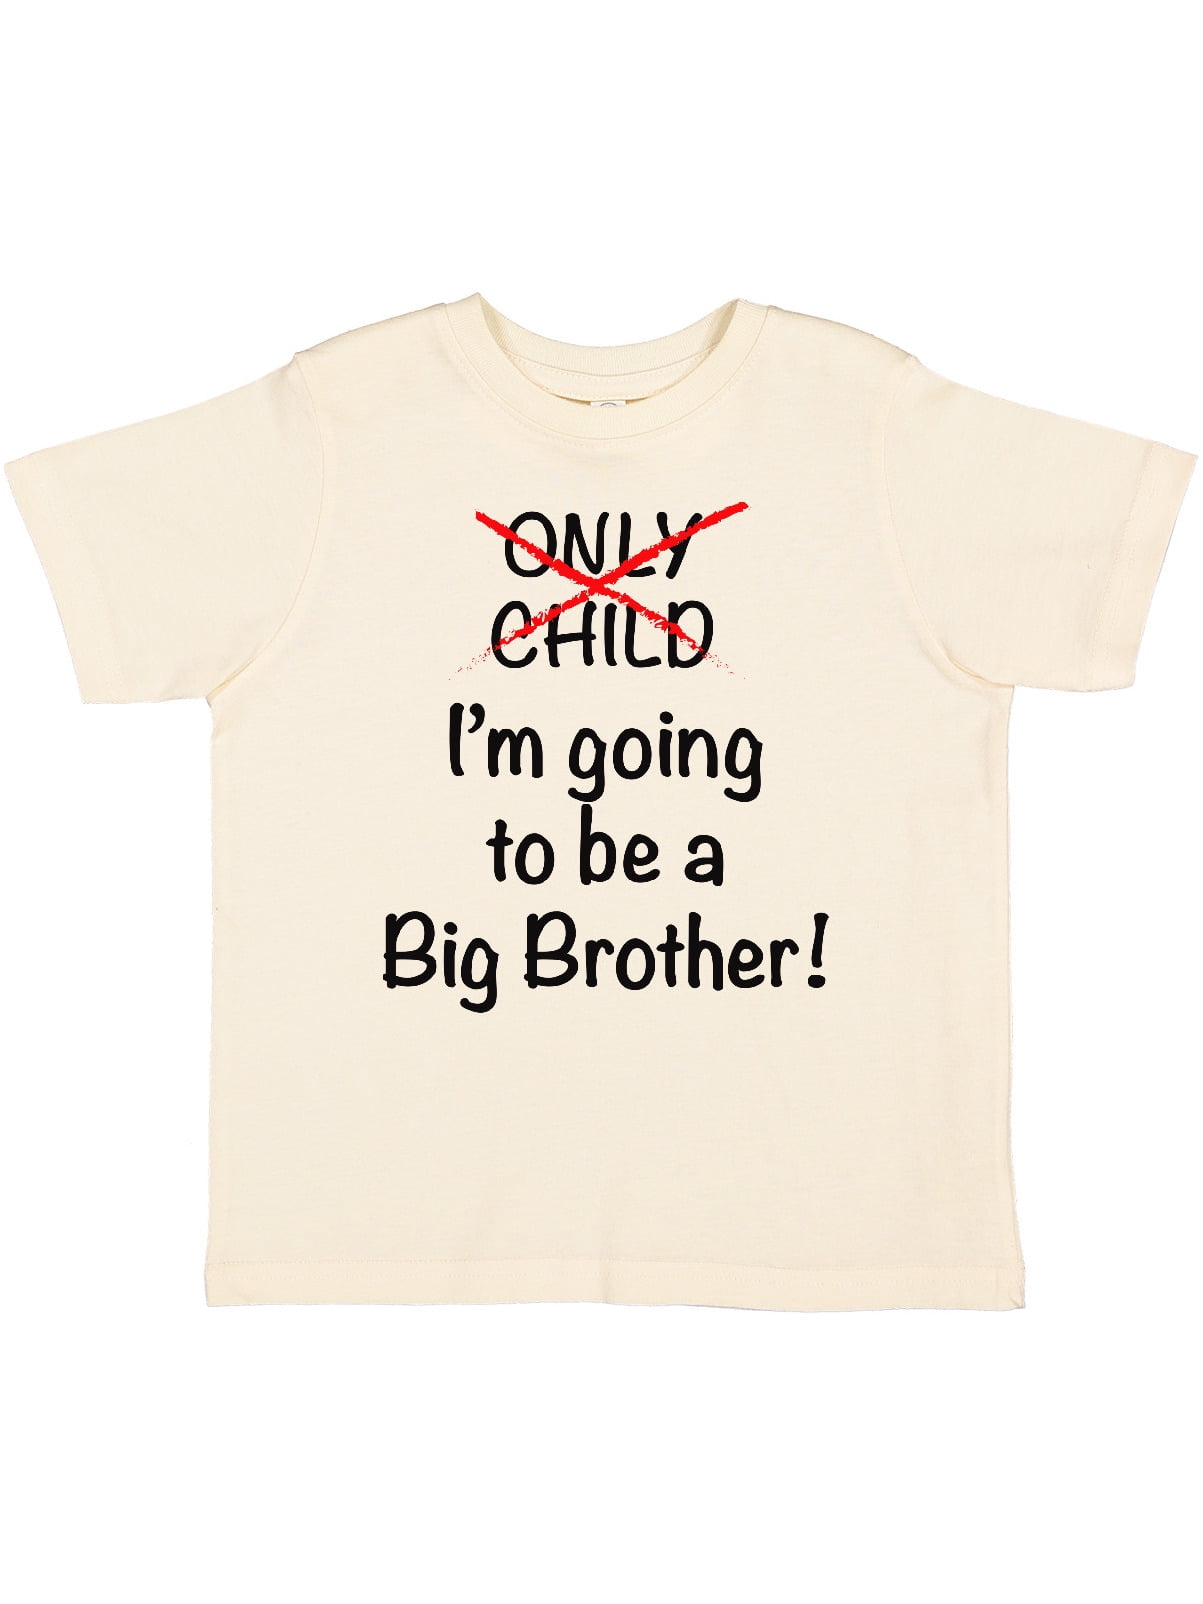 Little Bro bodysuit or shirt baby kids short or long sleeve baby announcement onsie little brother baby brother daily threads